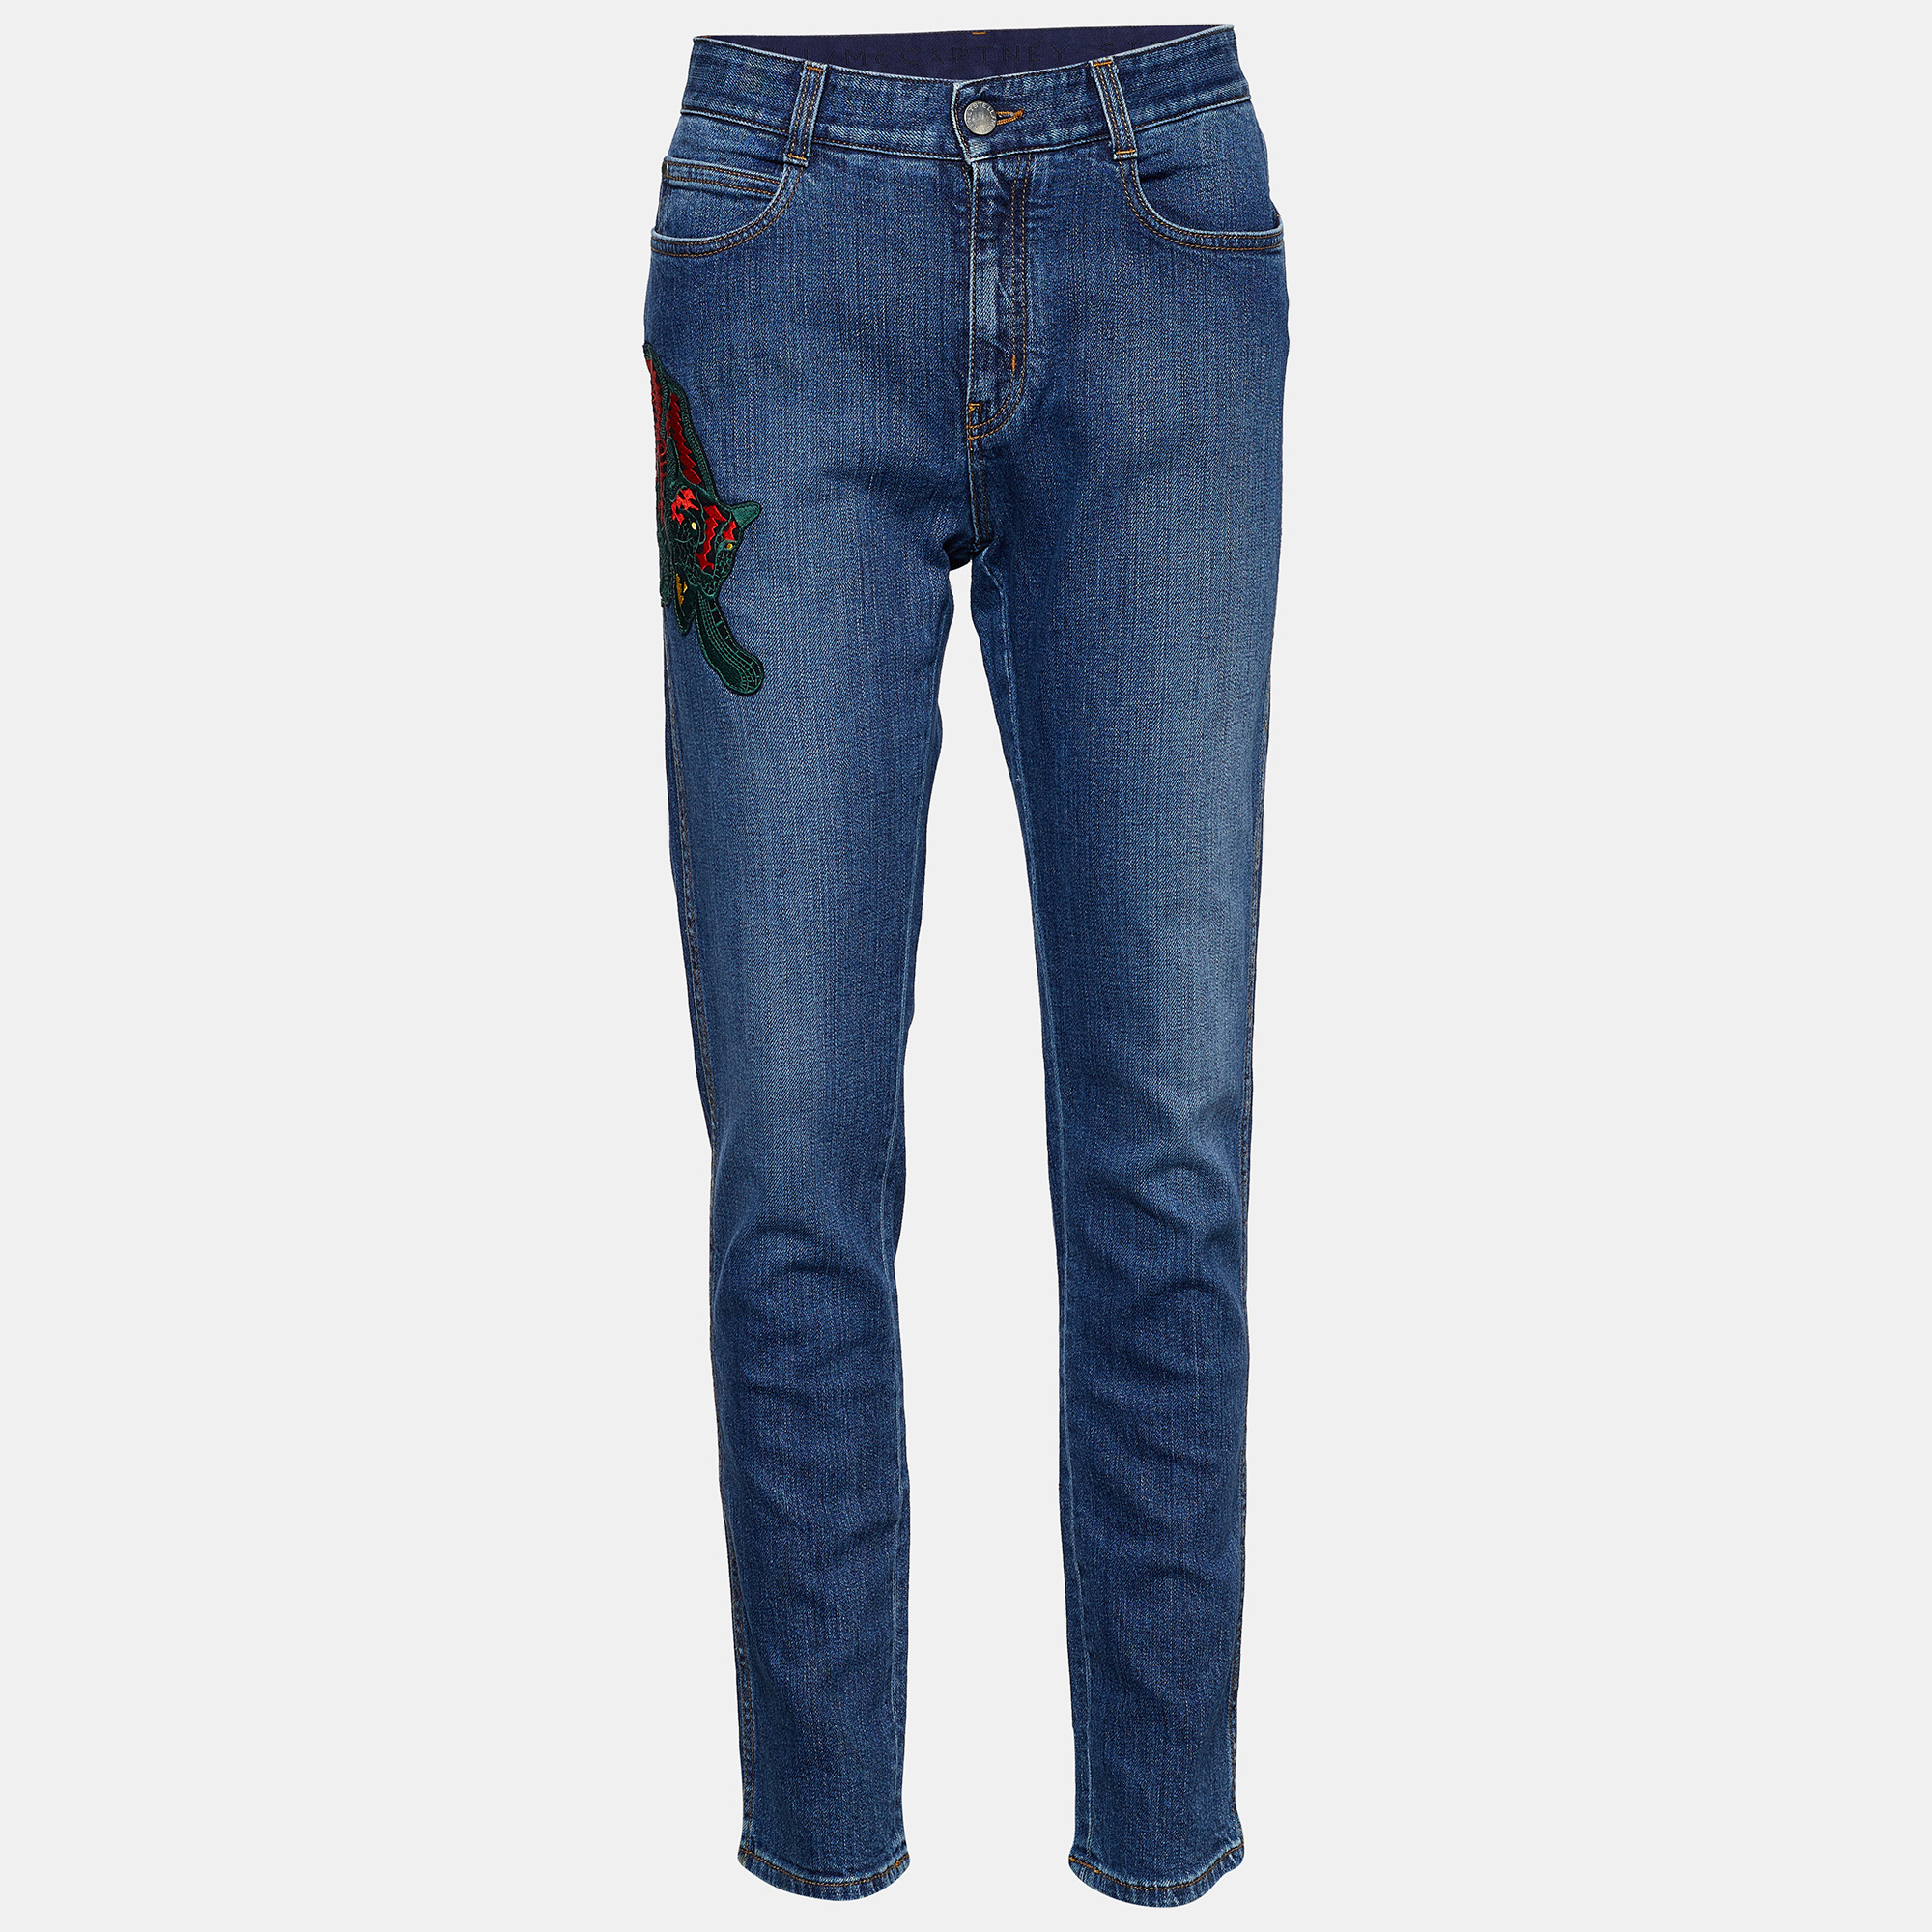 Stella mccartney navy blue wild cat embroidered tapered jeans m